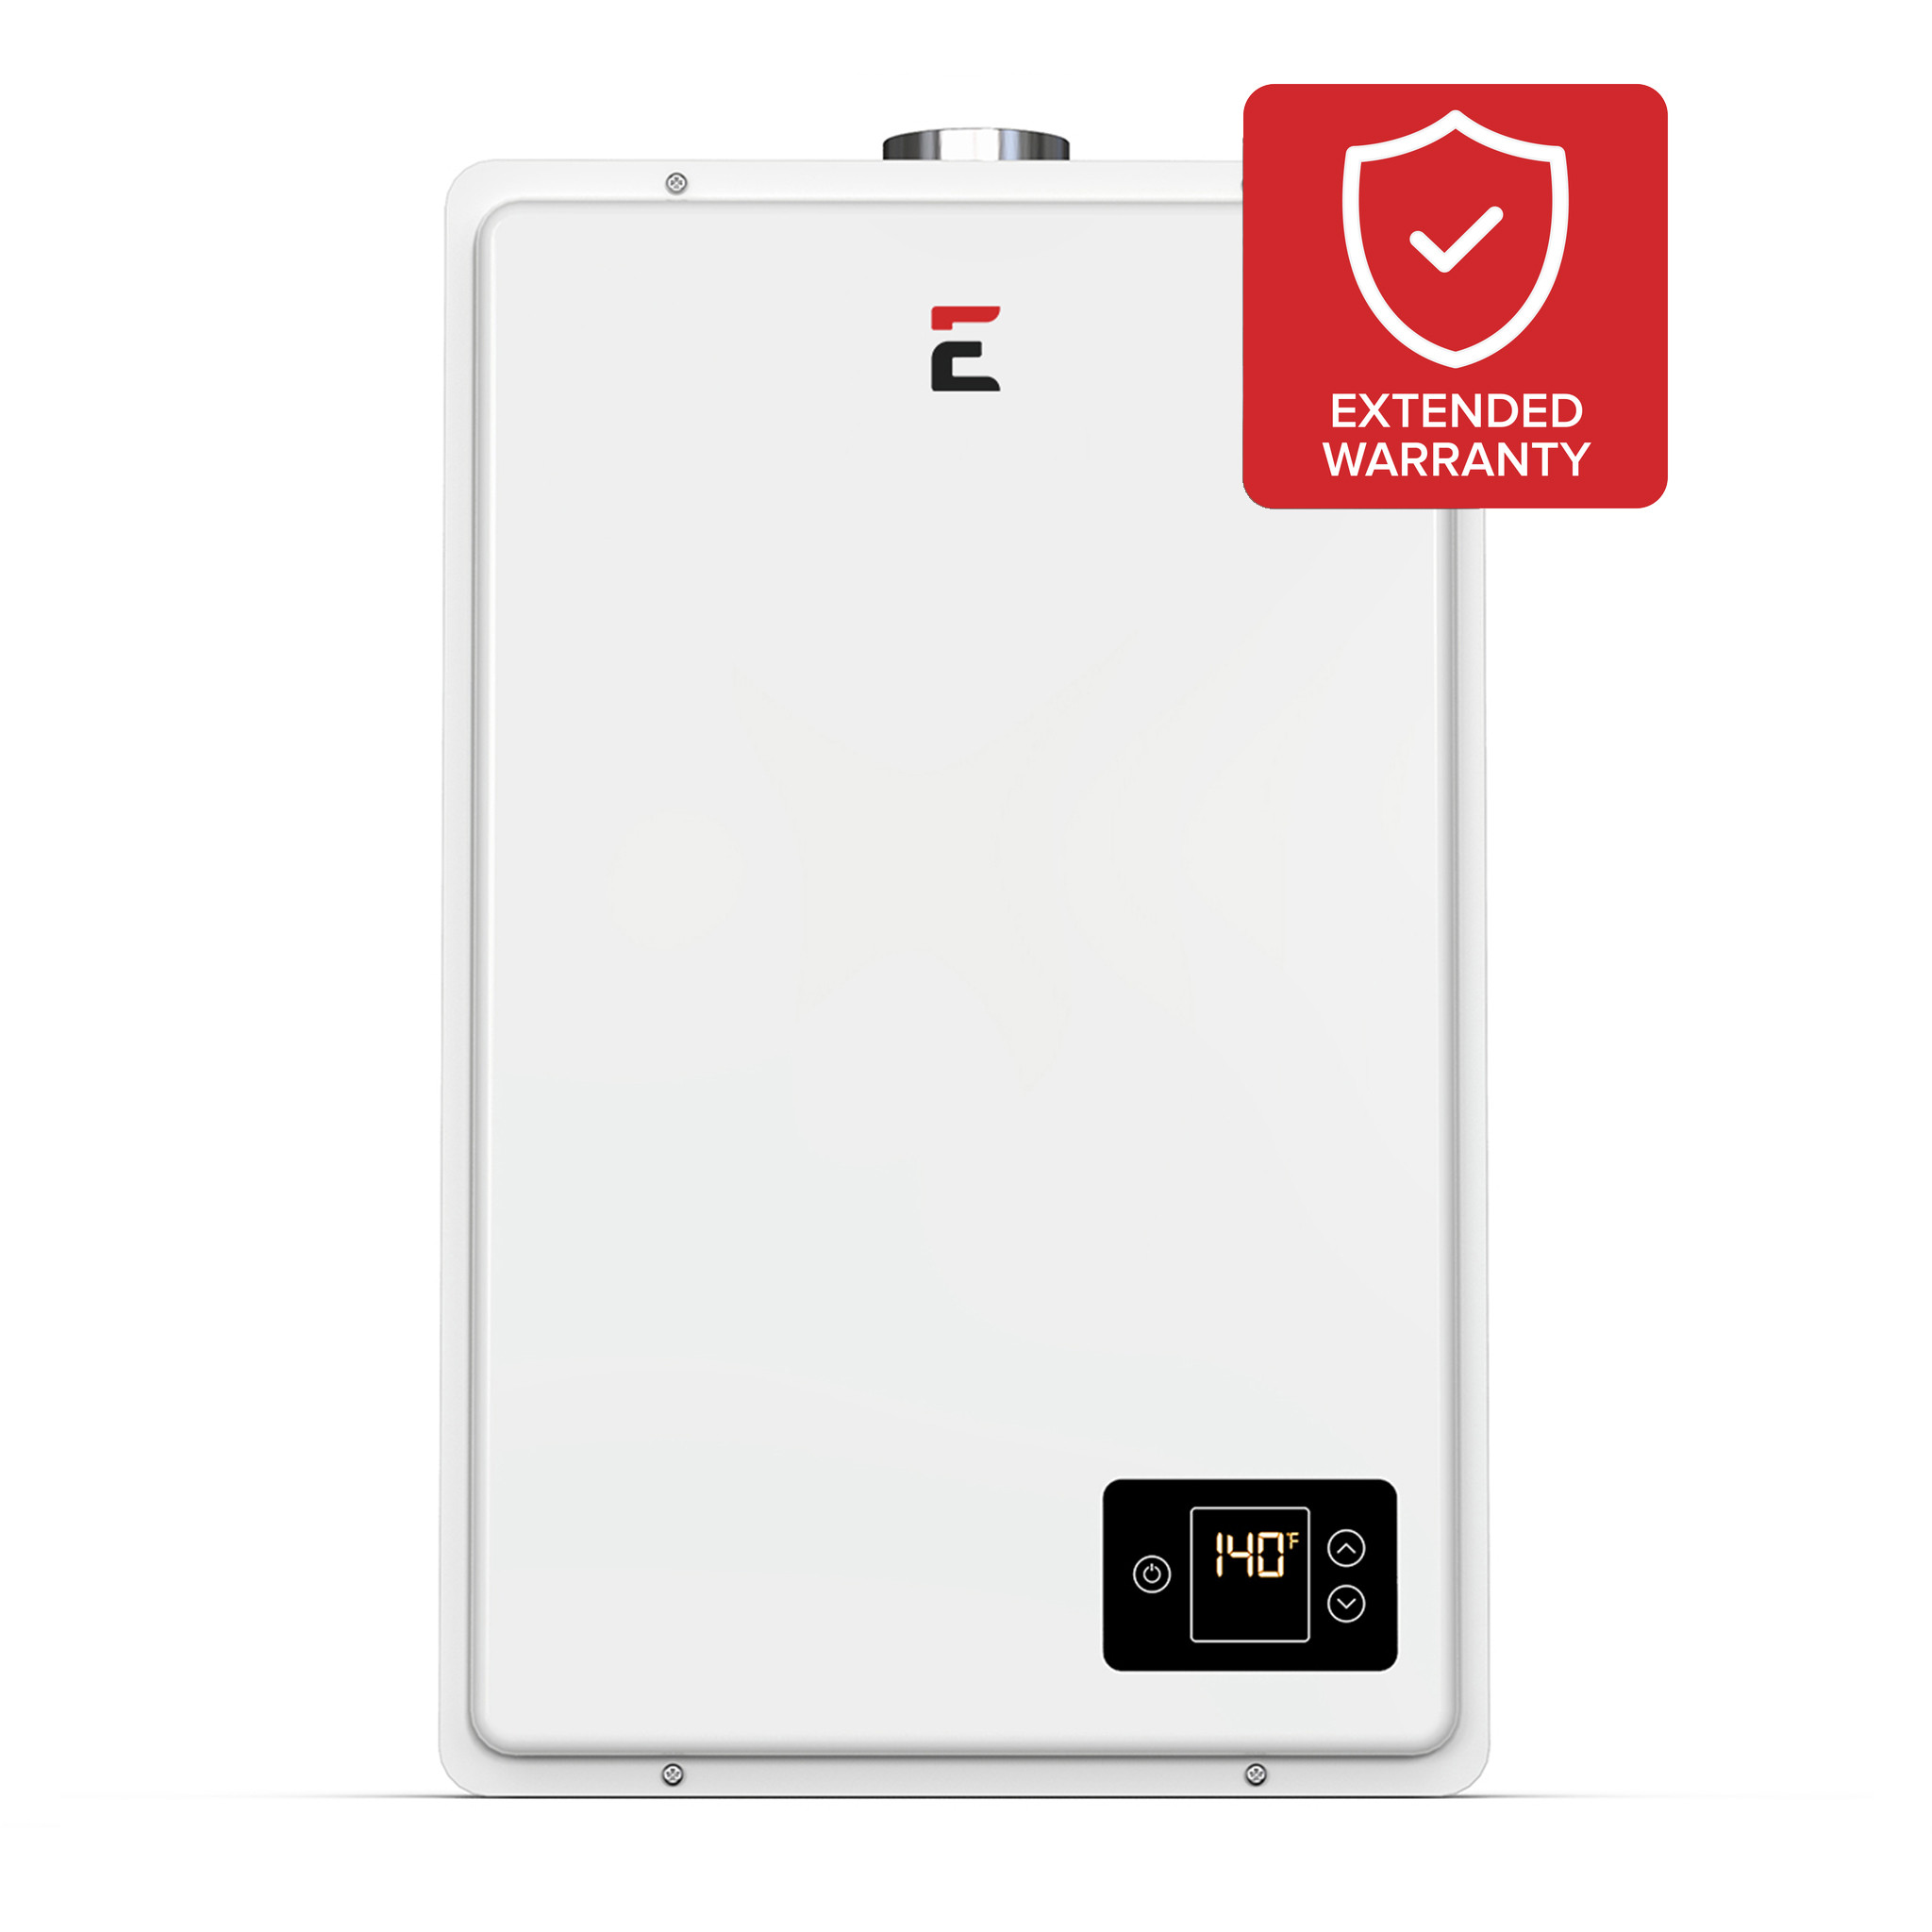 20HI Tankless Water Heaters Protection Plans | Eccotemp CA